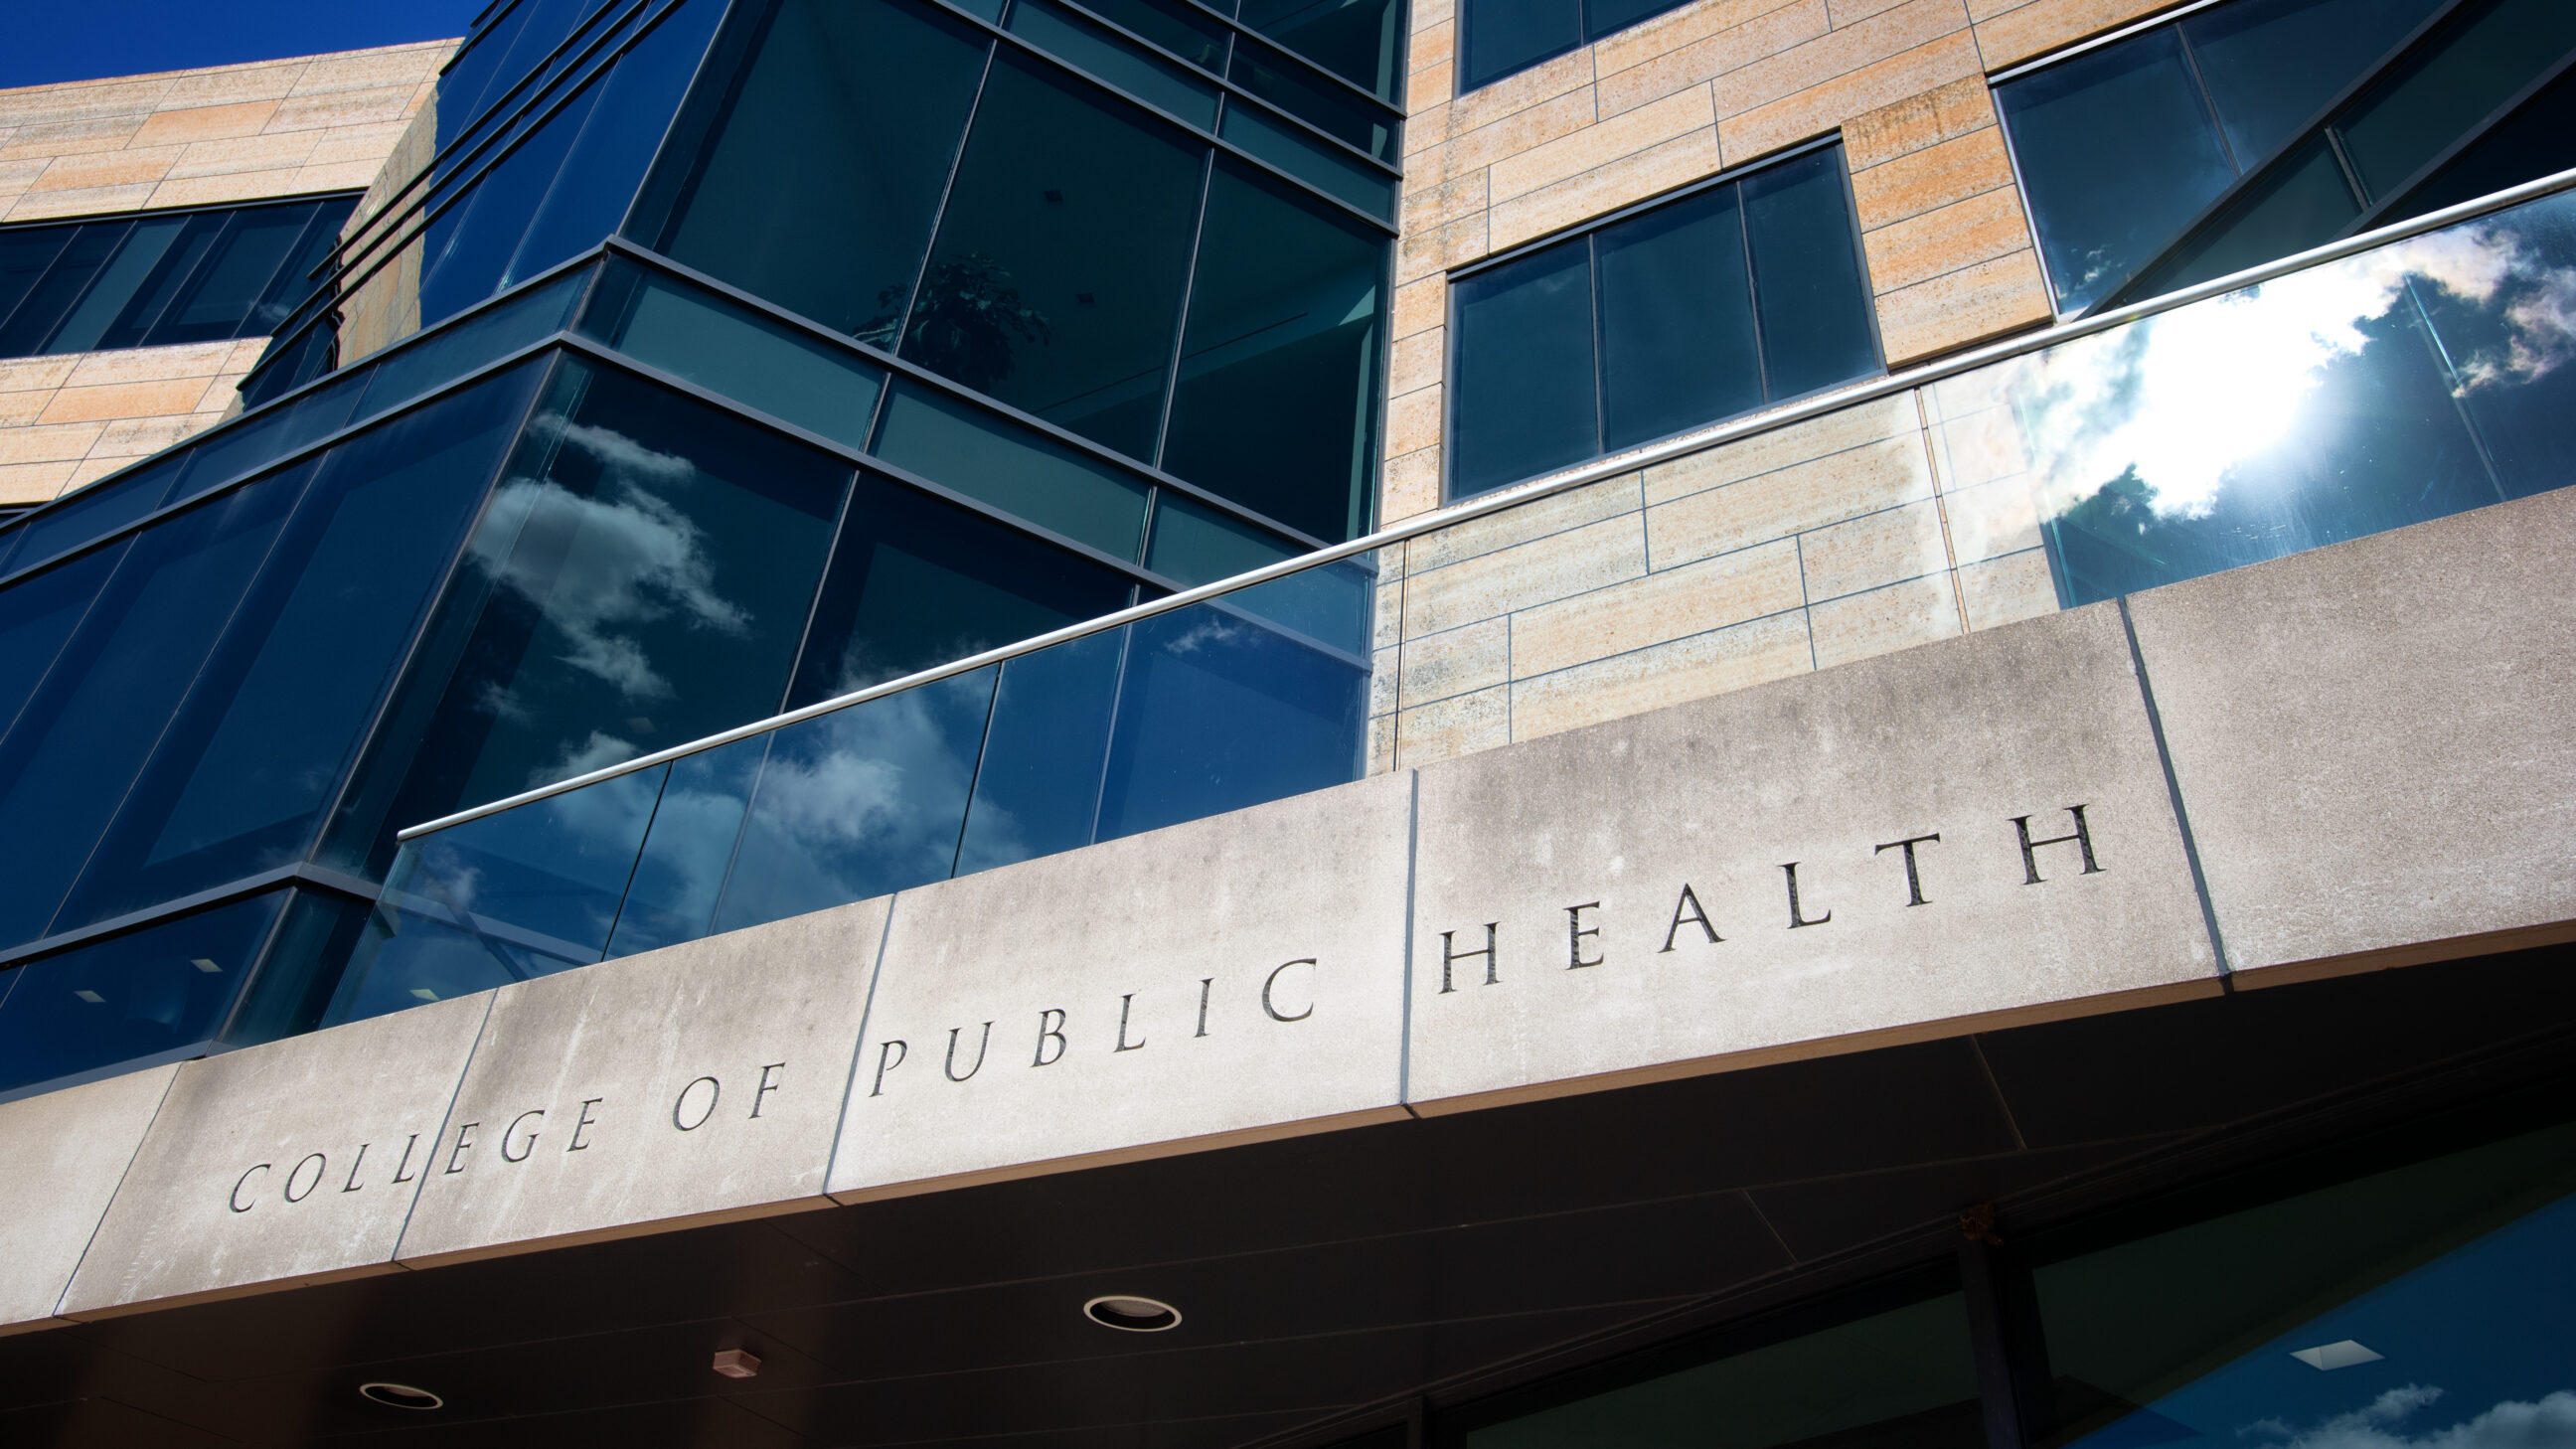 The "College of Public Health" sign, etched in stone, above the south entrance to the College of Public Health Building.